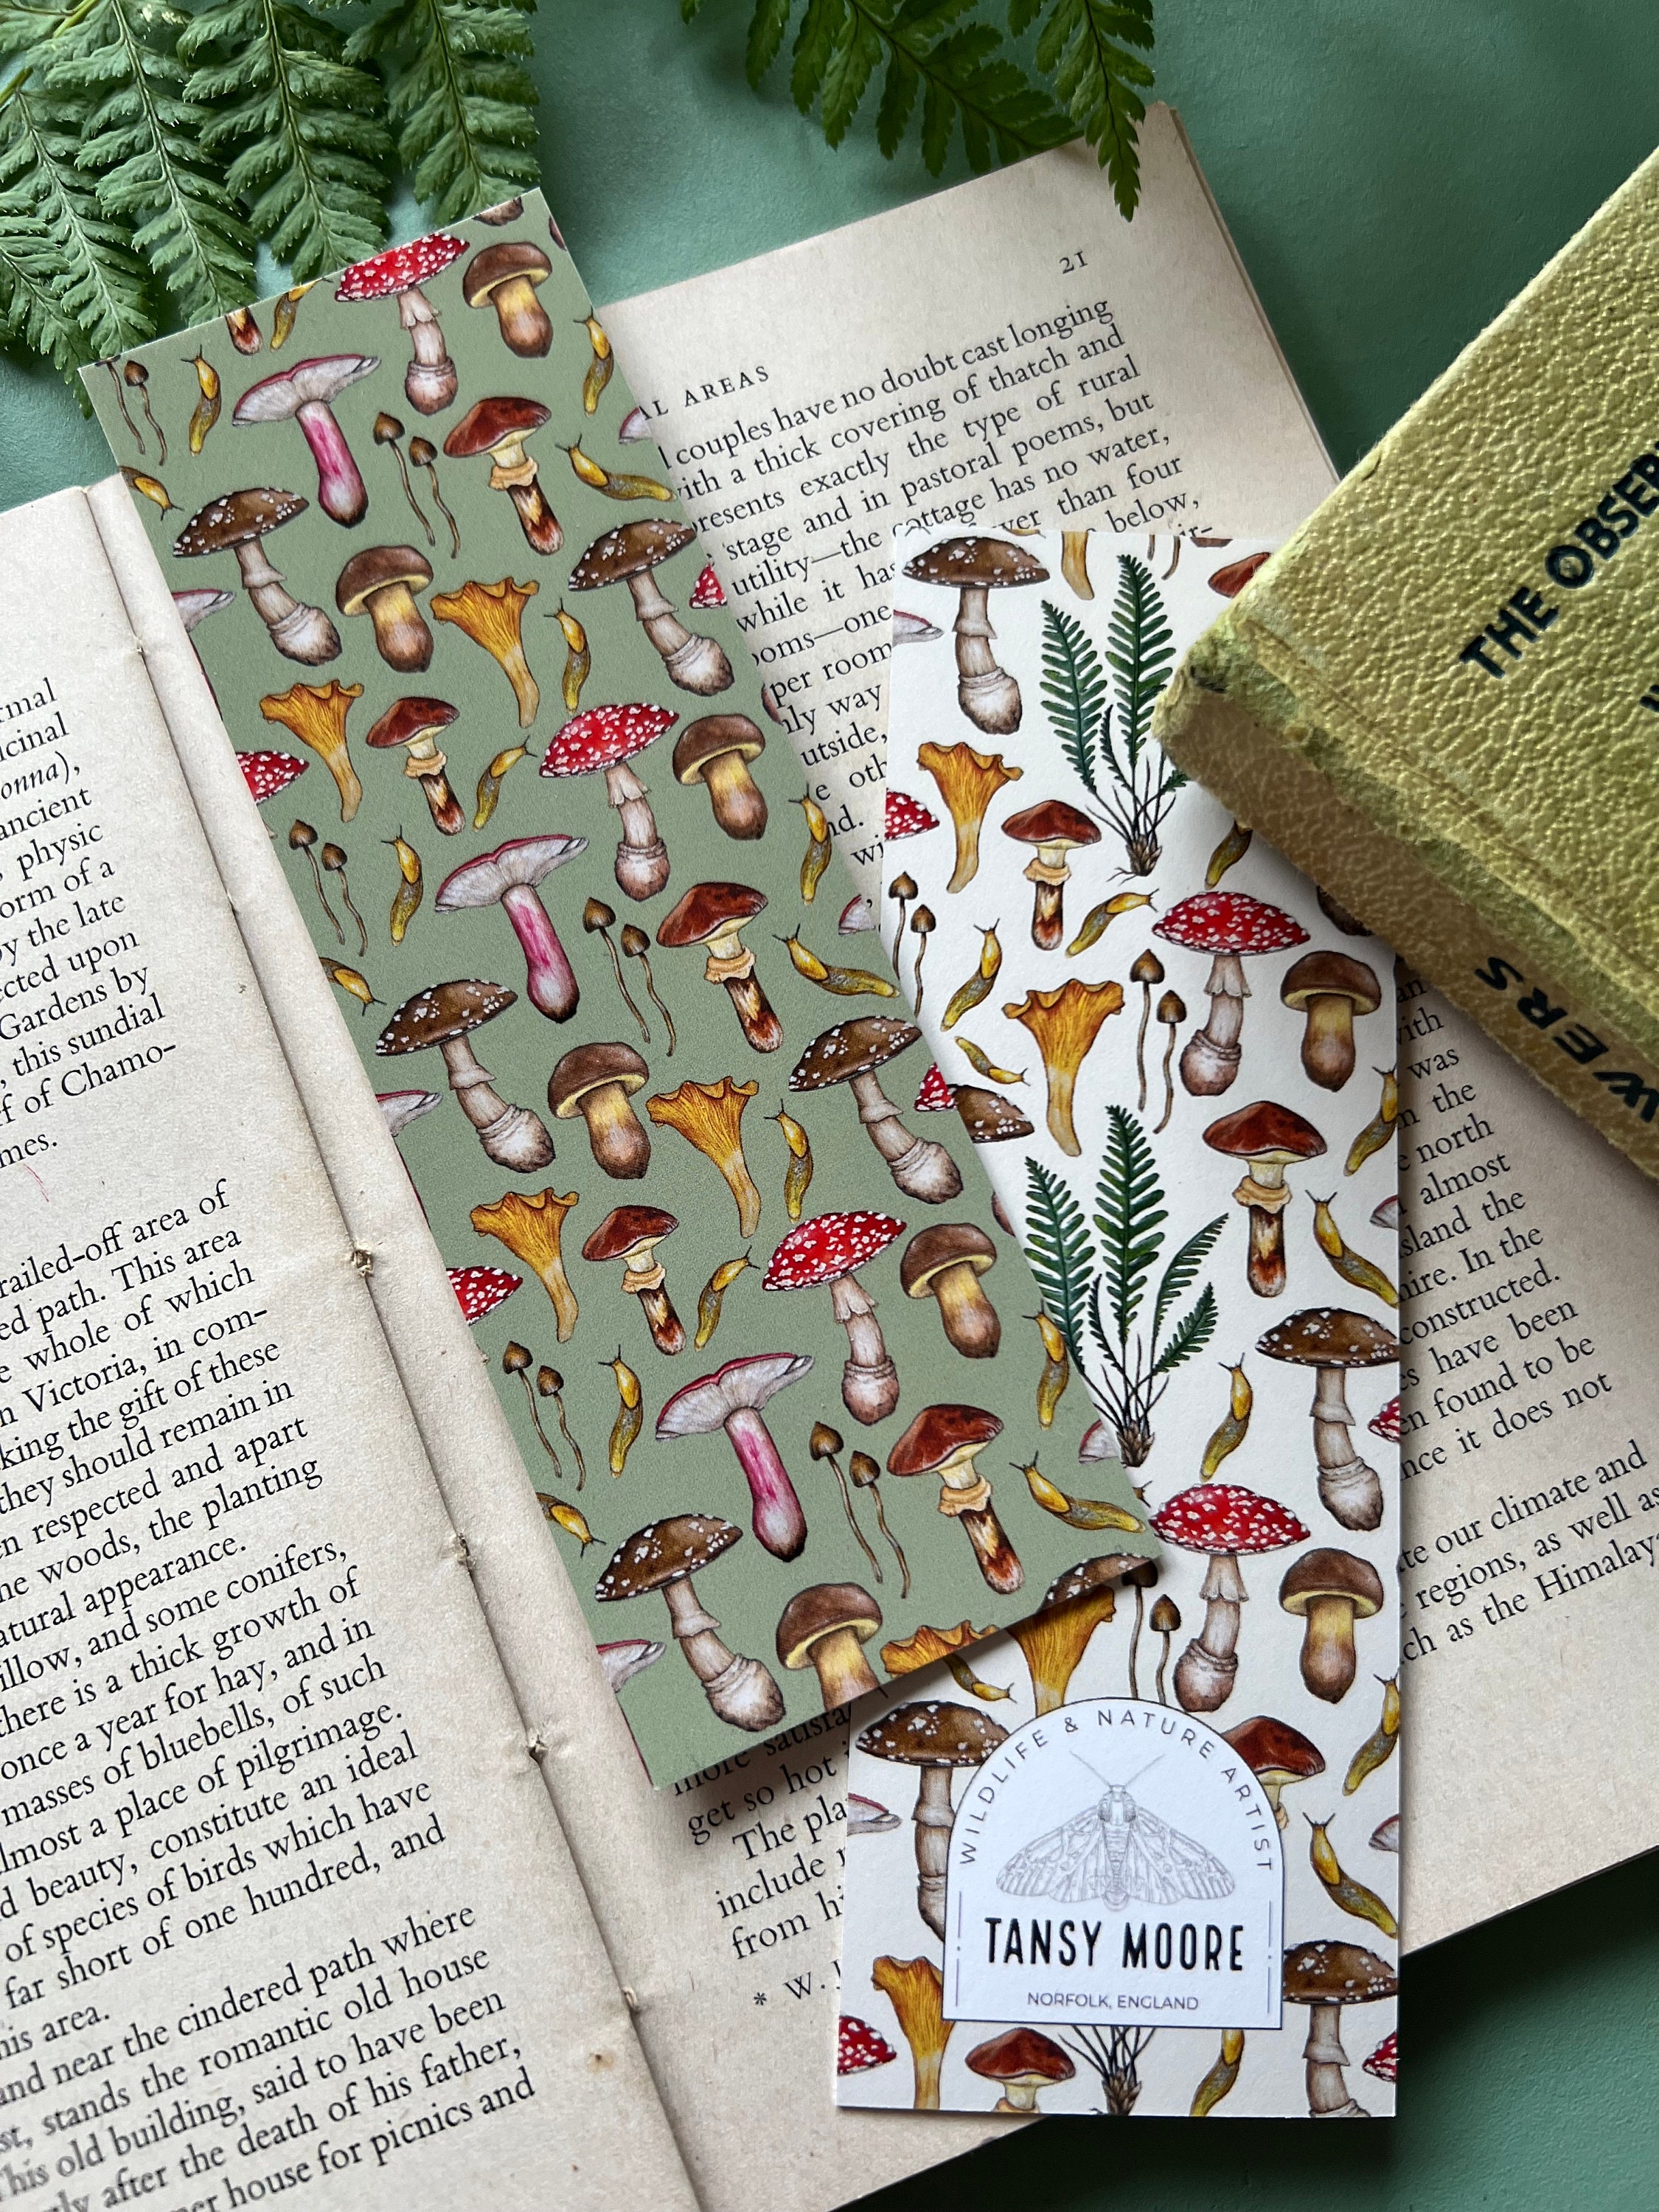  Mushroom Bookmark Set of 3, Red Shiitake Mushrooms Bookmark,  Cute Bookmarks Aesthetic Plant Bookmark, Handmade Leather Bookmarks for  Women Men Kids Girl Bookworm Book Lovers Gift, 6.61 x 0.98 inch : Office  Products